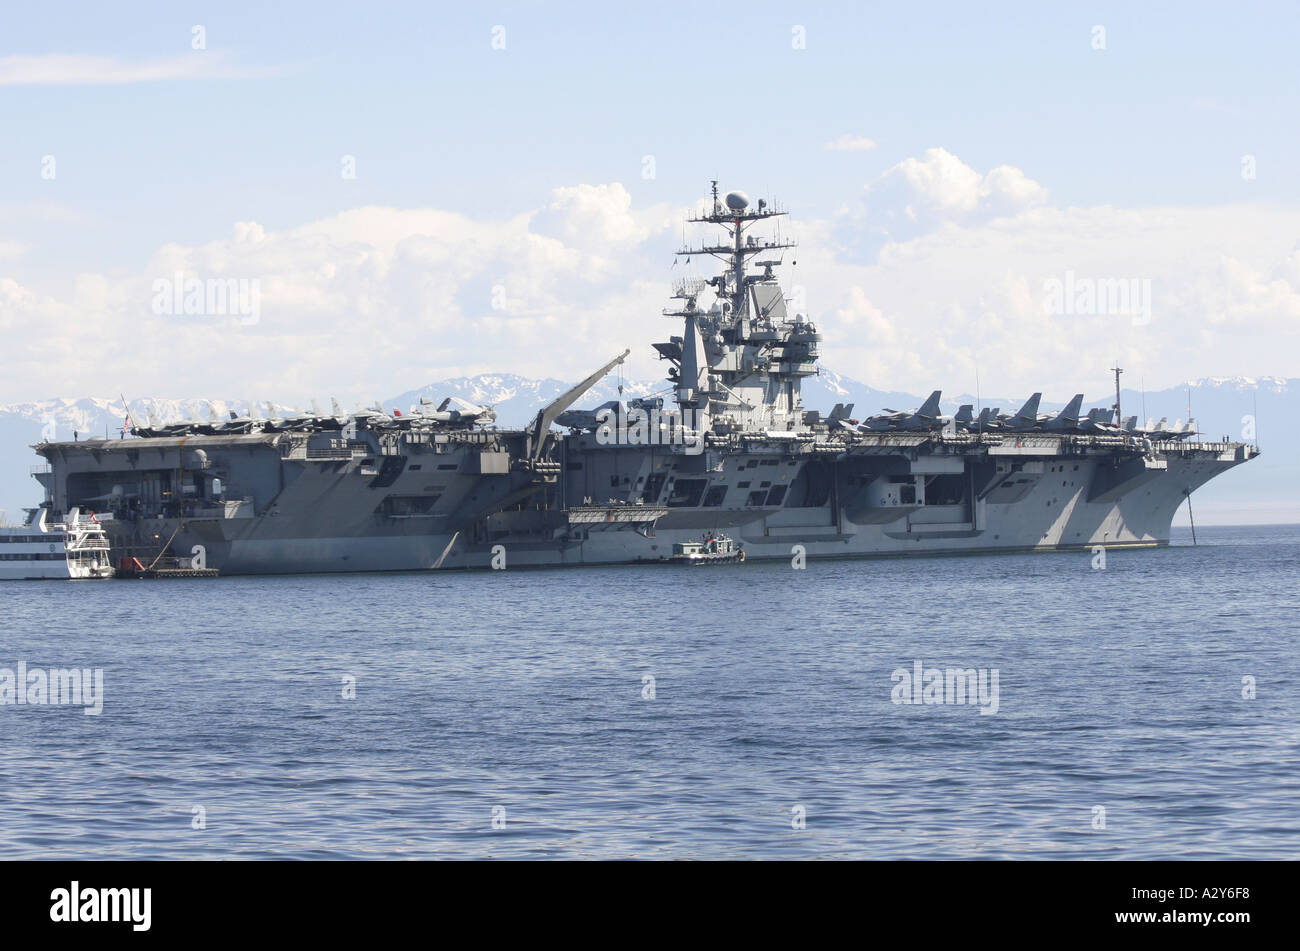 A United States Aircraft Carrier moored off Victoria Vancouver Island Canada Stock Photo